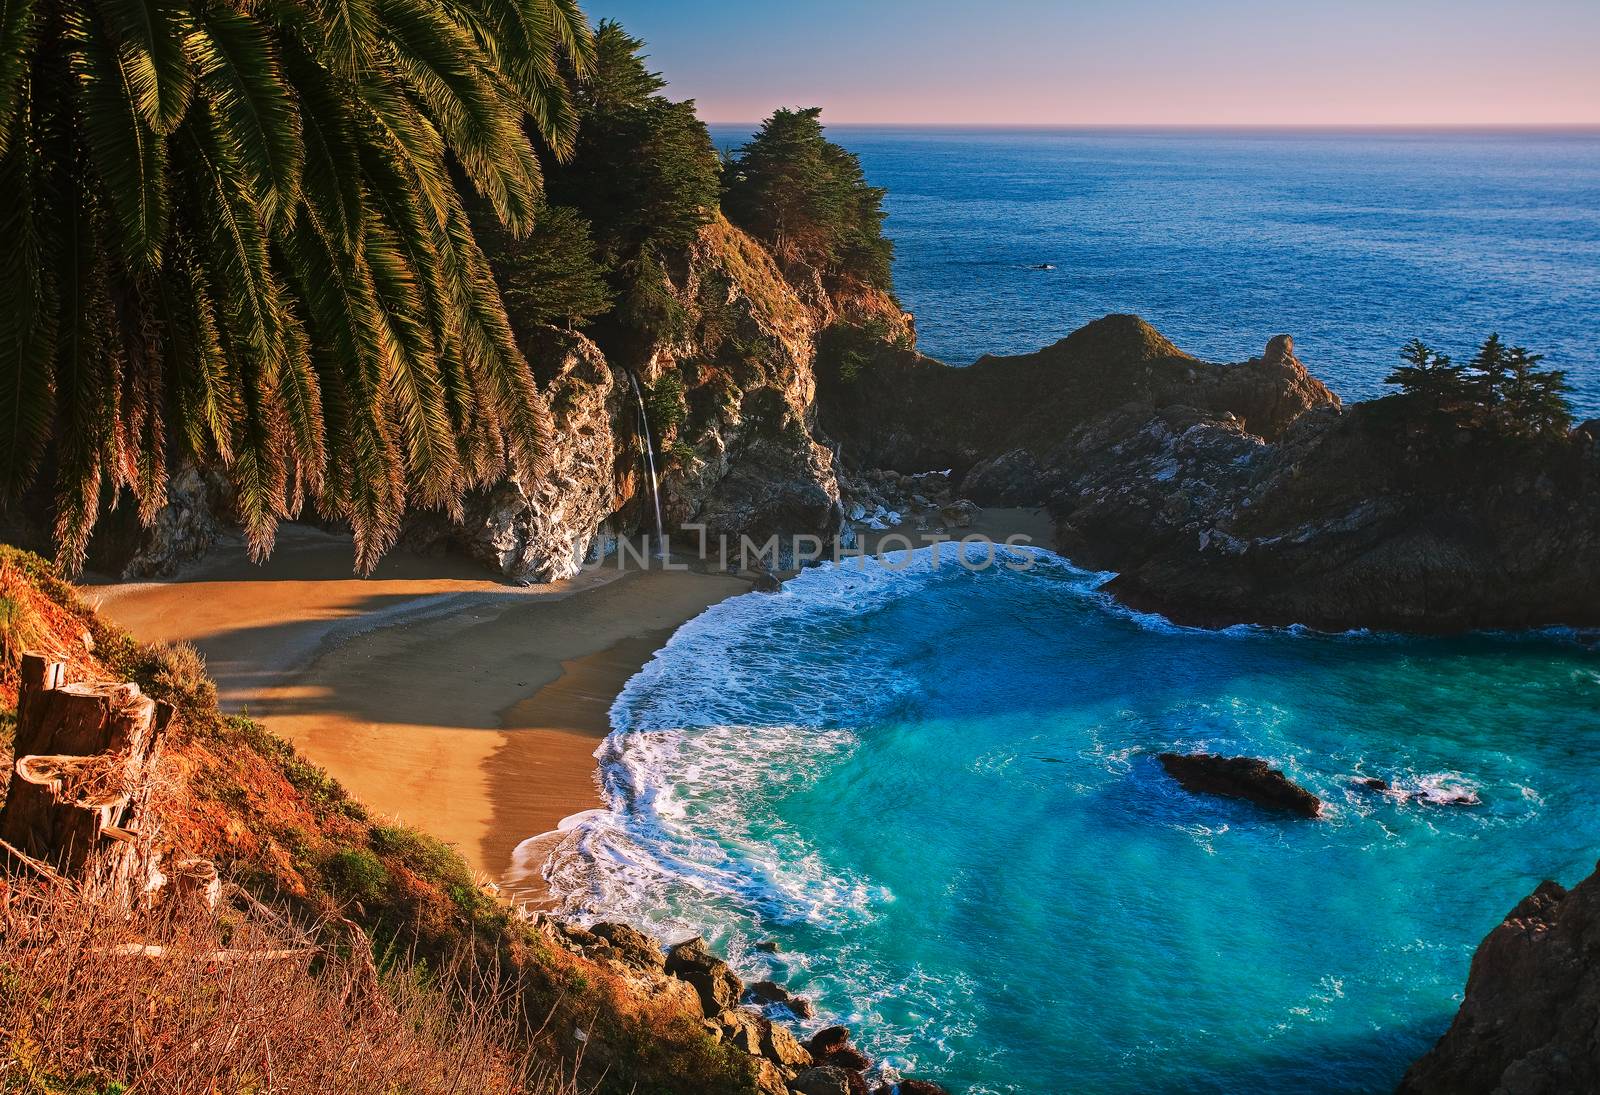 McWay Falls is a water in the Pffeifer Burns State Park in Big Sur California.